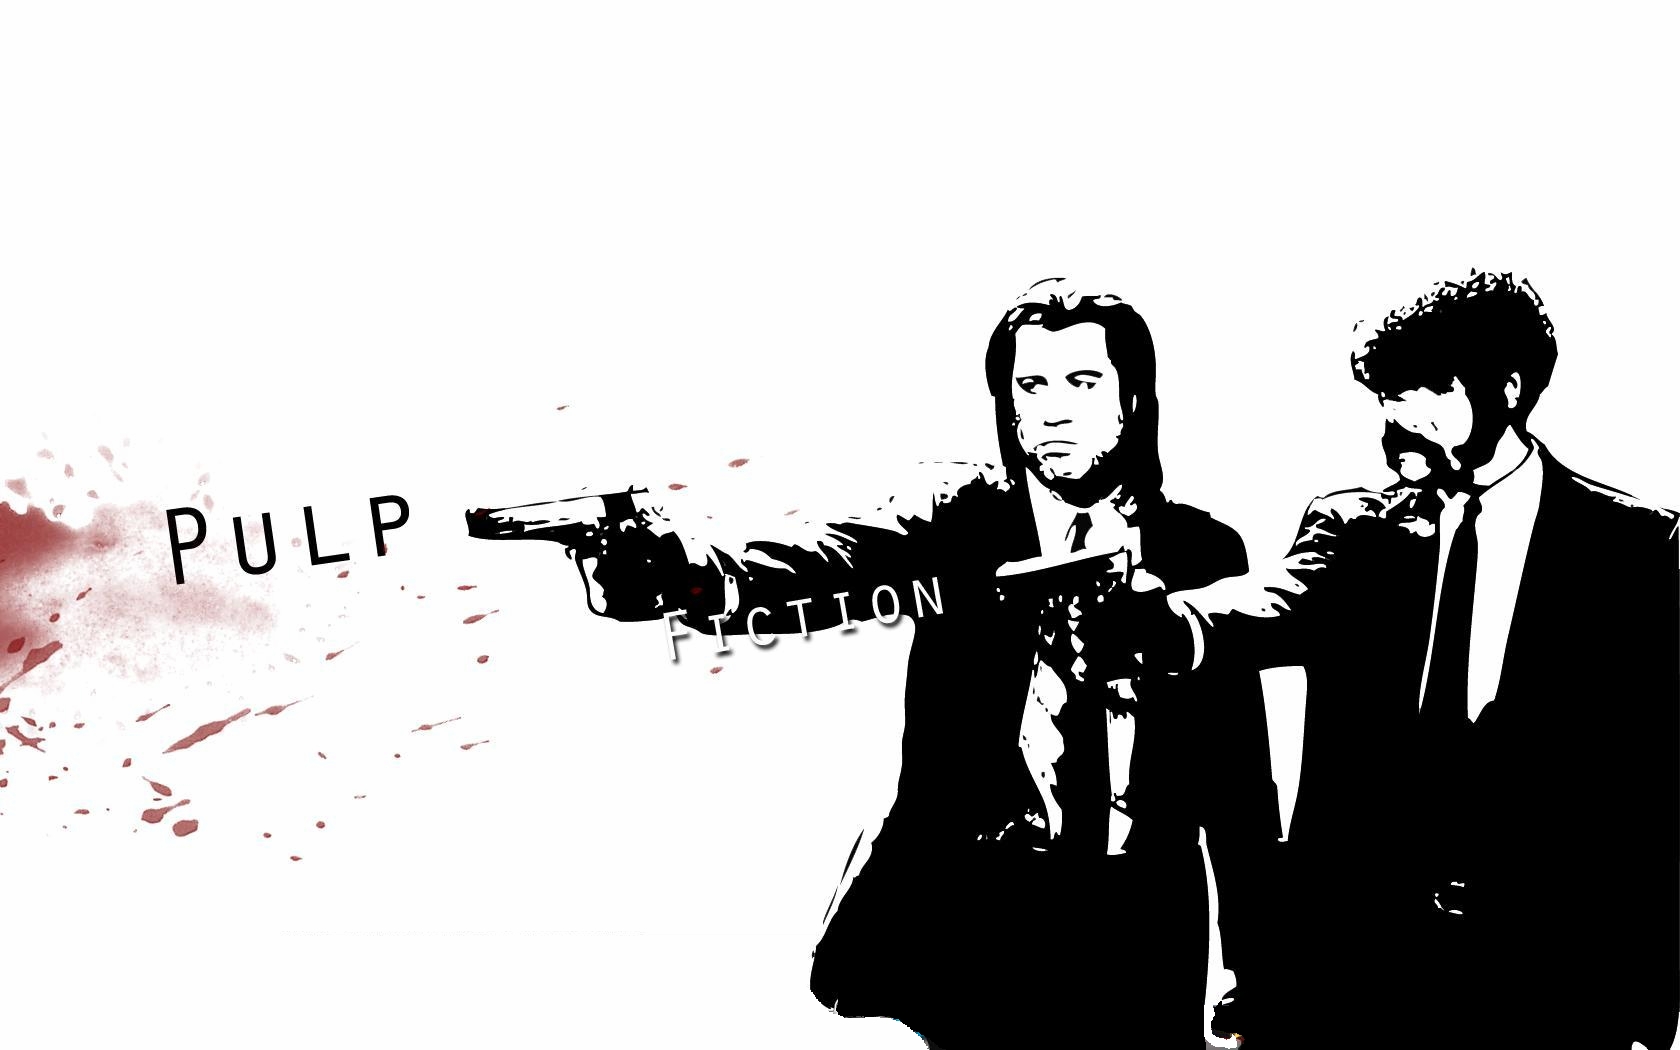 movie, pulp fiction wallpaper for mobile